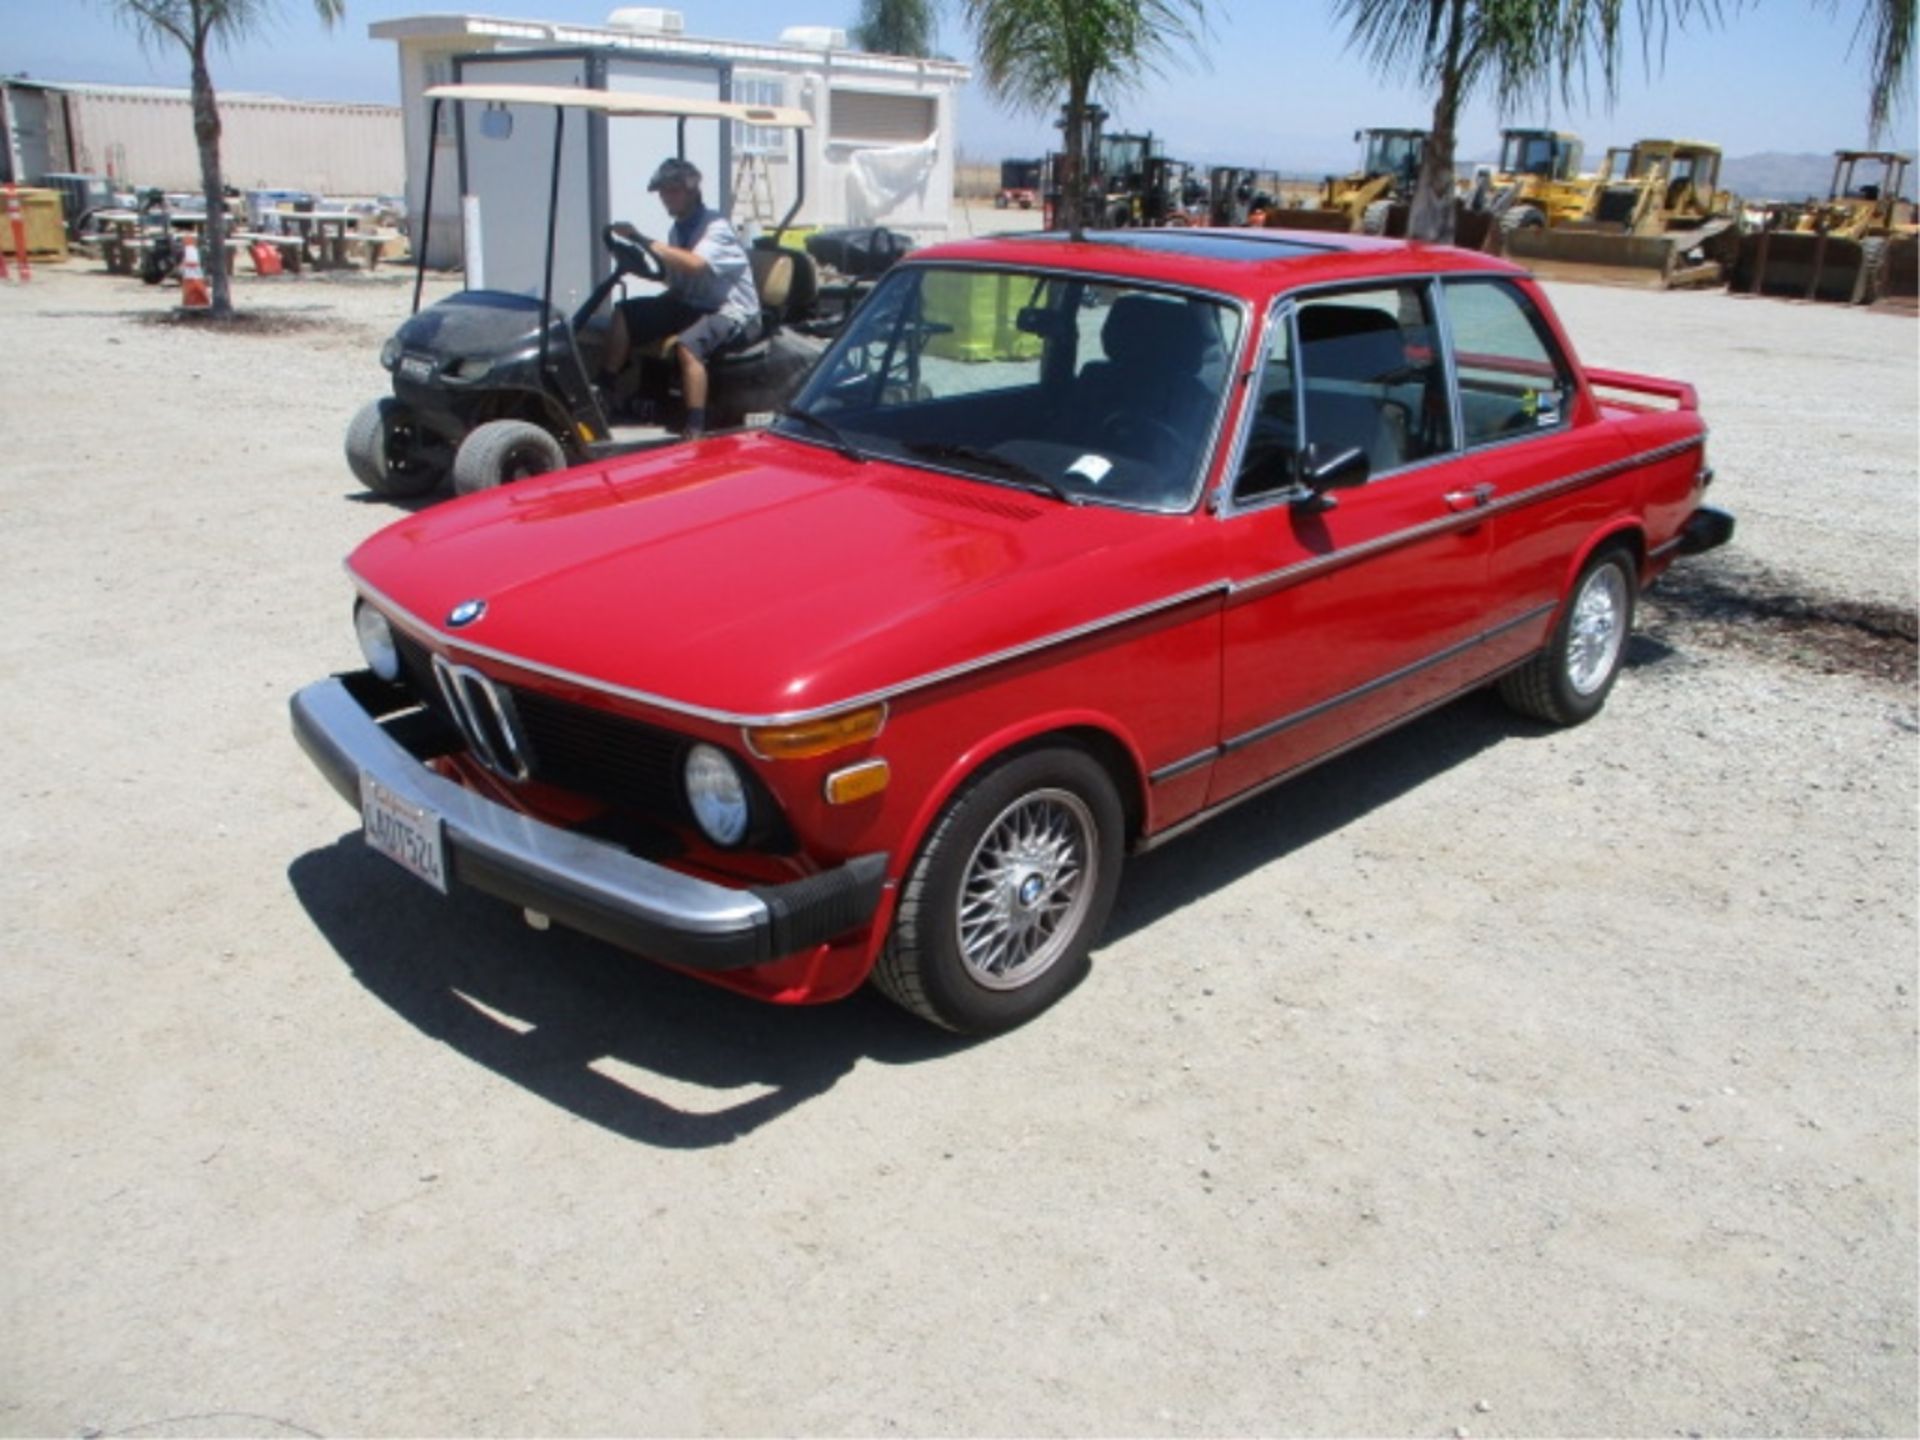 1972 BMW 2002ti Coupe, M10 4-Cyl Gas, 4-Speed Manual, S/N: 2761619, Mile/Hours - 49518 - Image 4 of 79